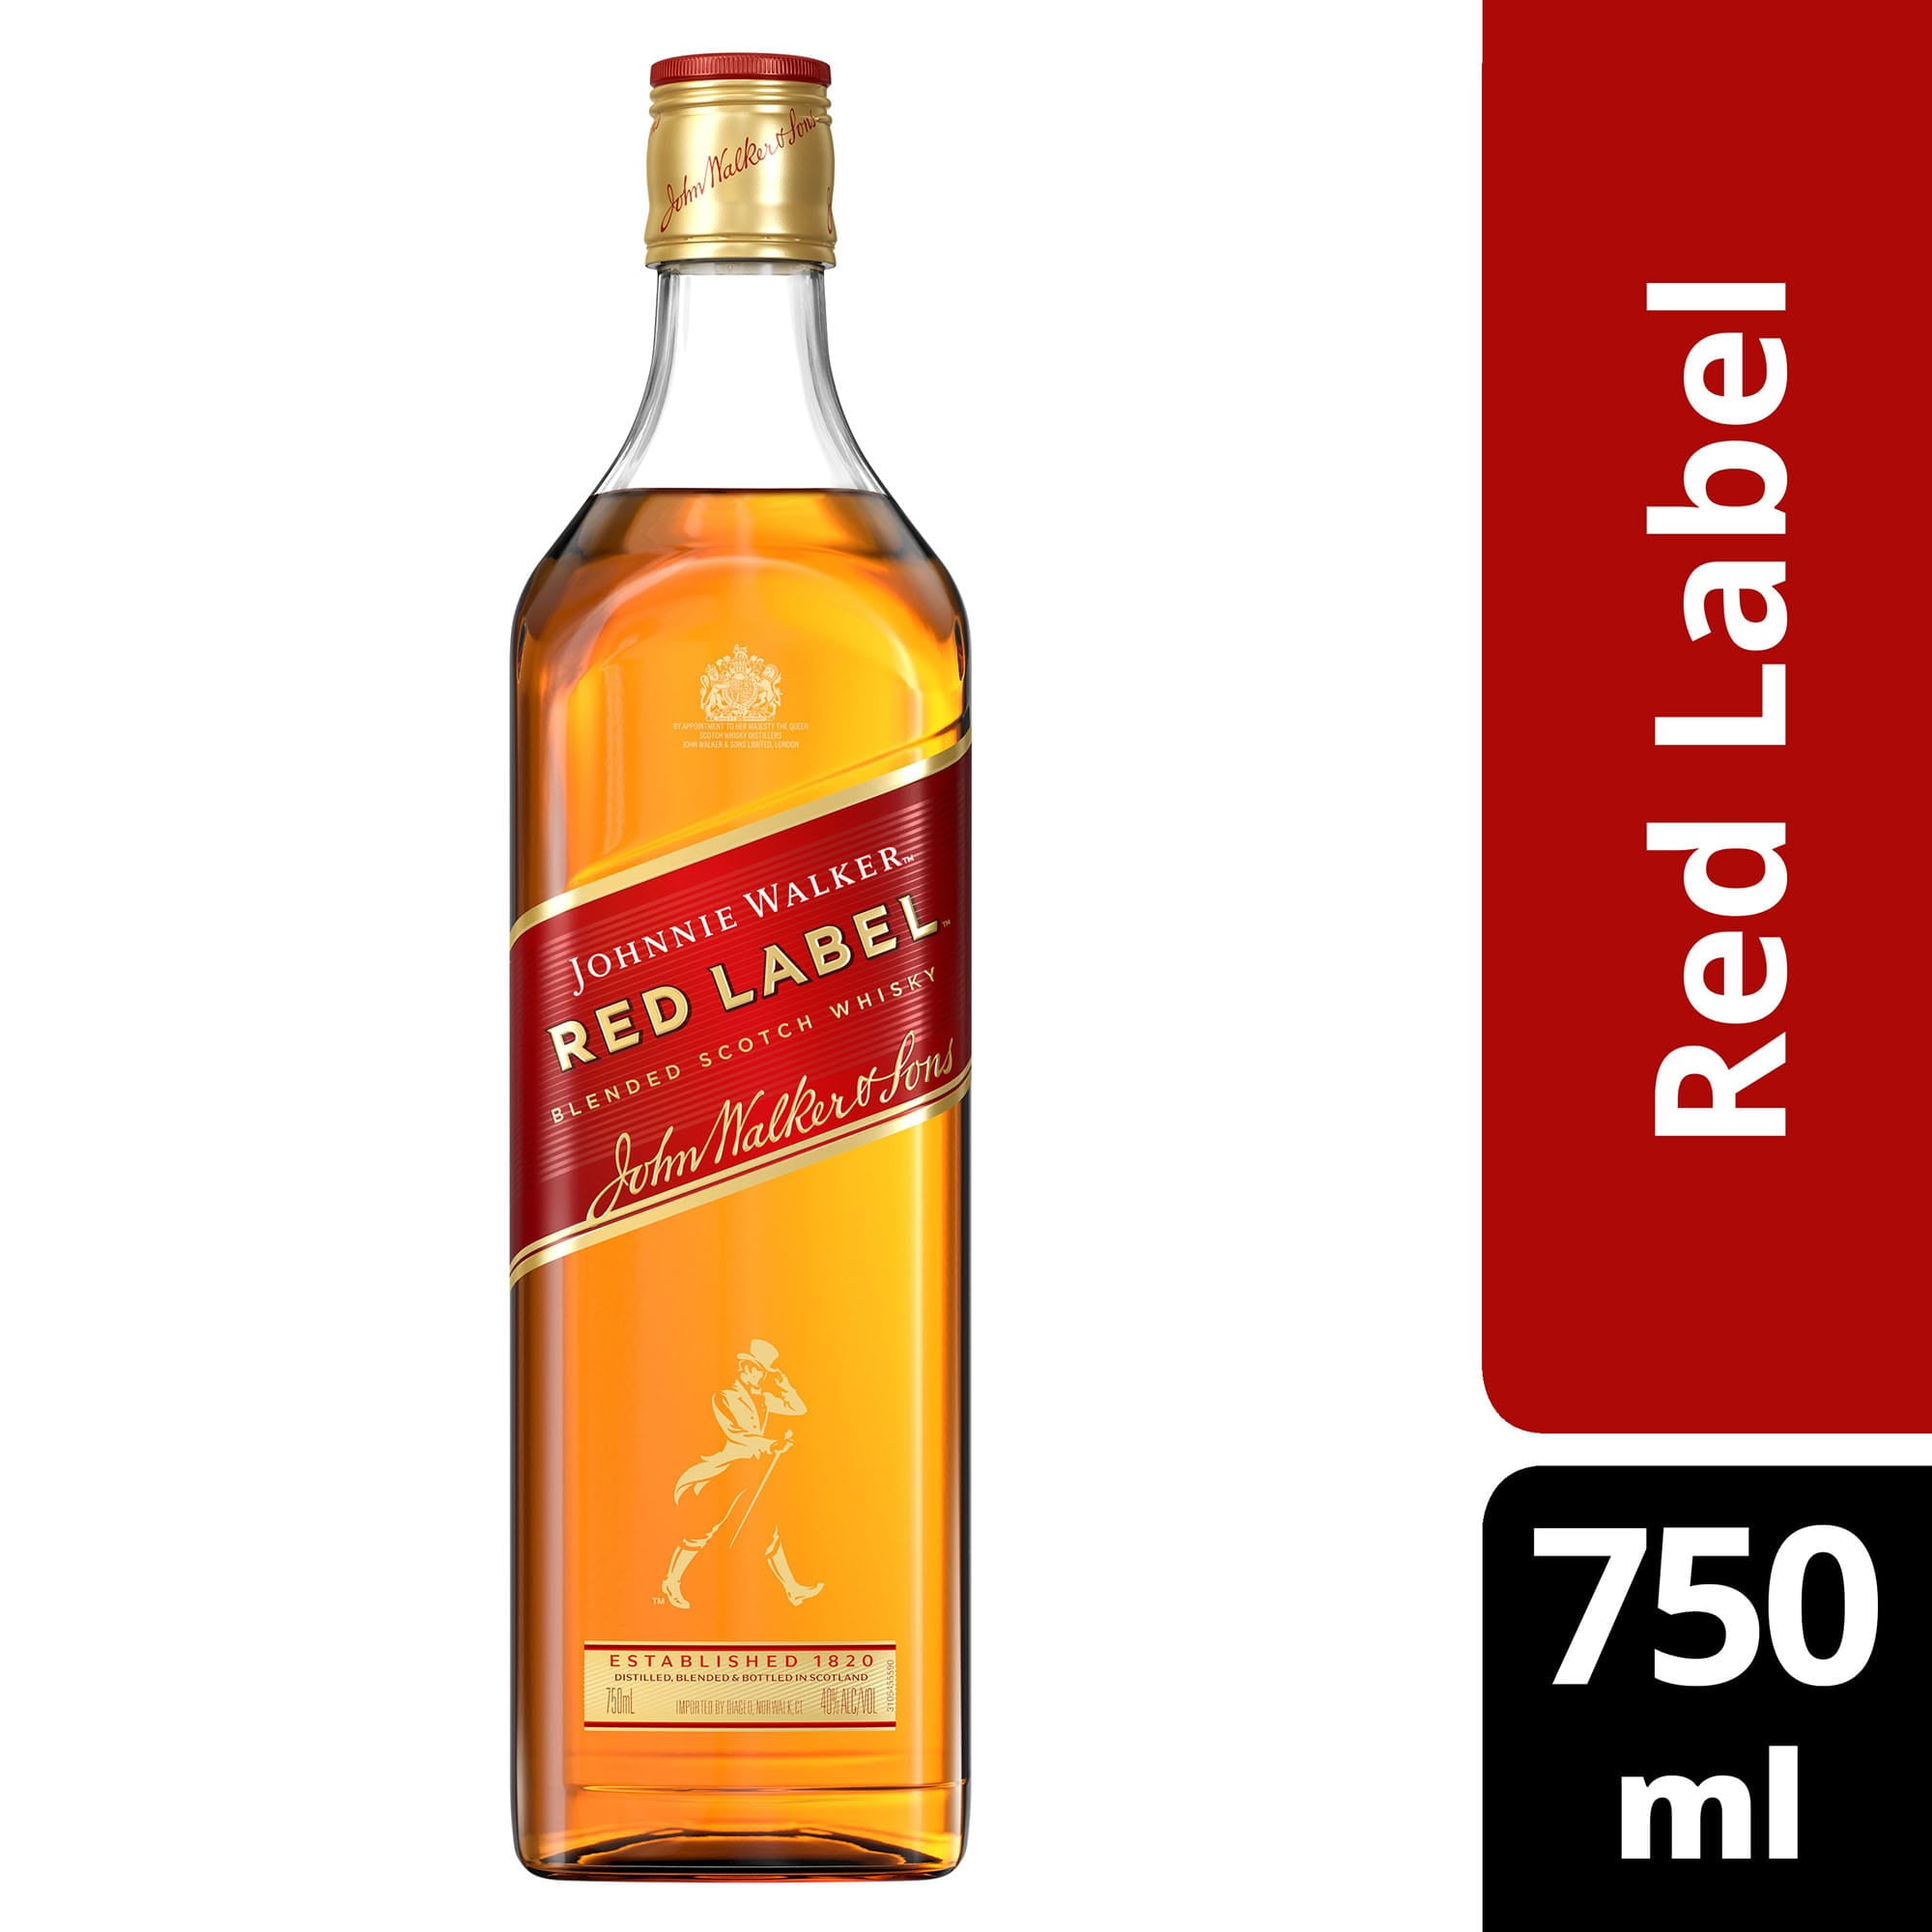 Johnnie Red Label Blended Scotch Whisky, 750 ml, 40% ABV - Walmart.com